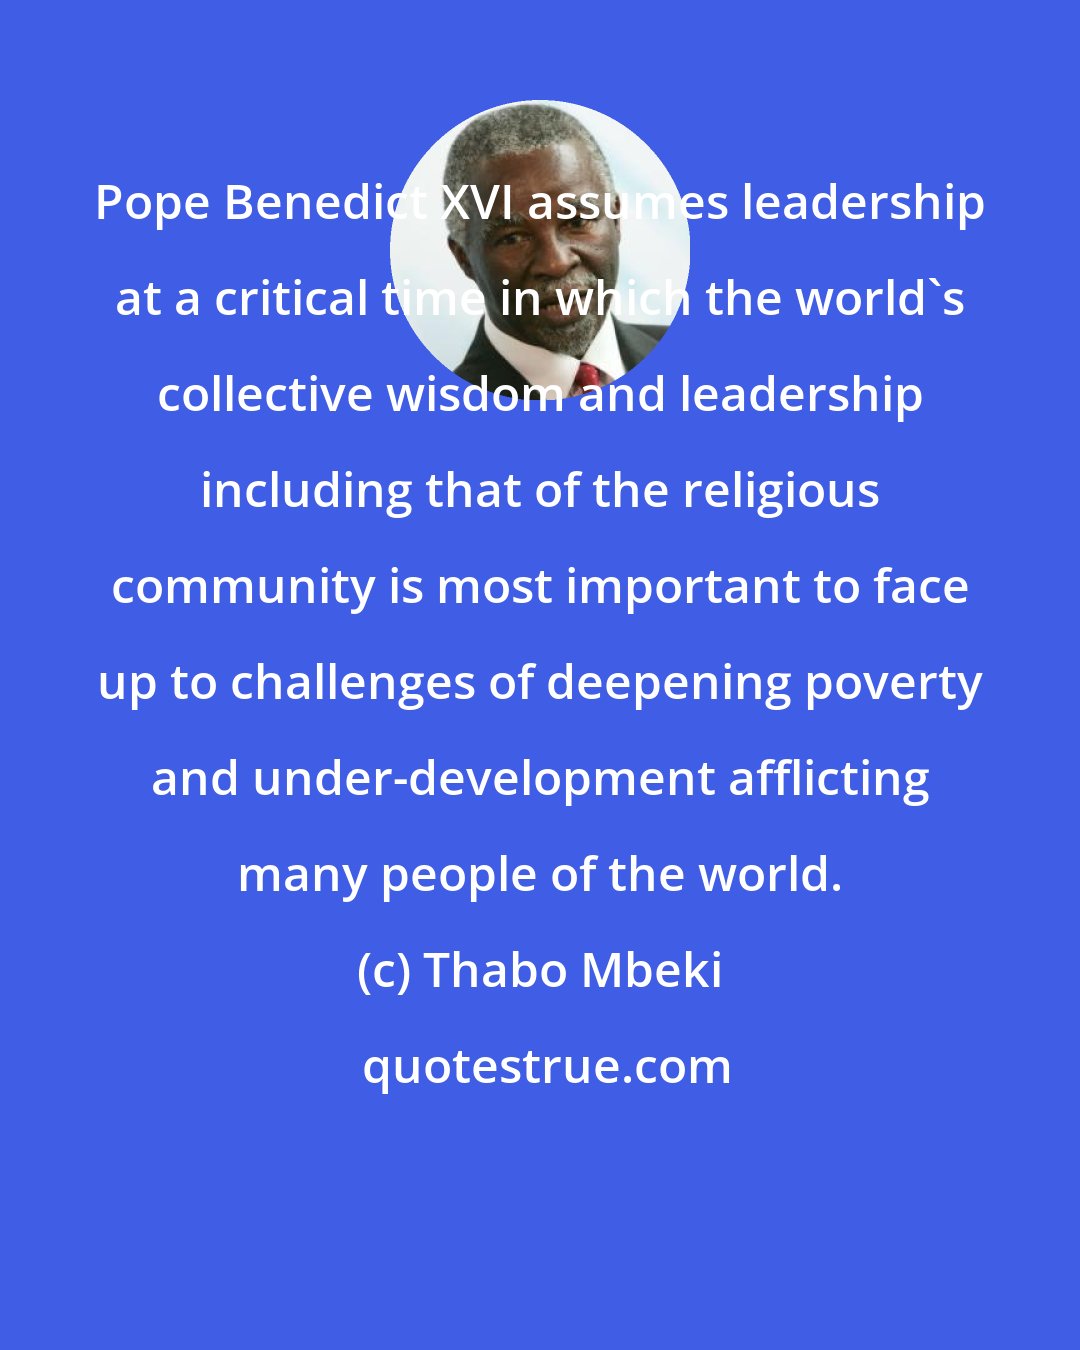 Thabo Mbeki: Pope Benedict XVI assumes leadership at a critical time in which the world's collective wisdom and leadership including that of the religious community is most important to face up to challenges of deepening poverty and under-development afflicting many people of the world.